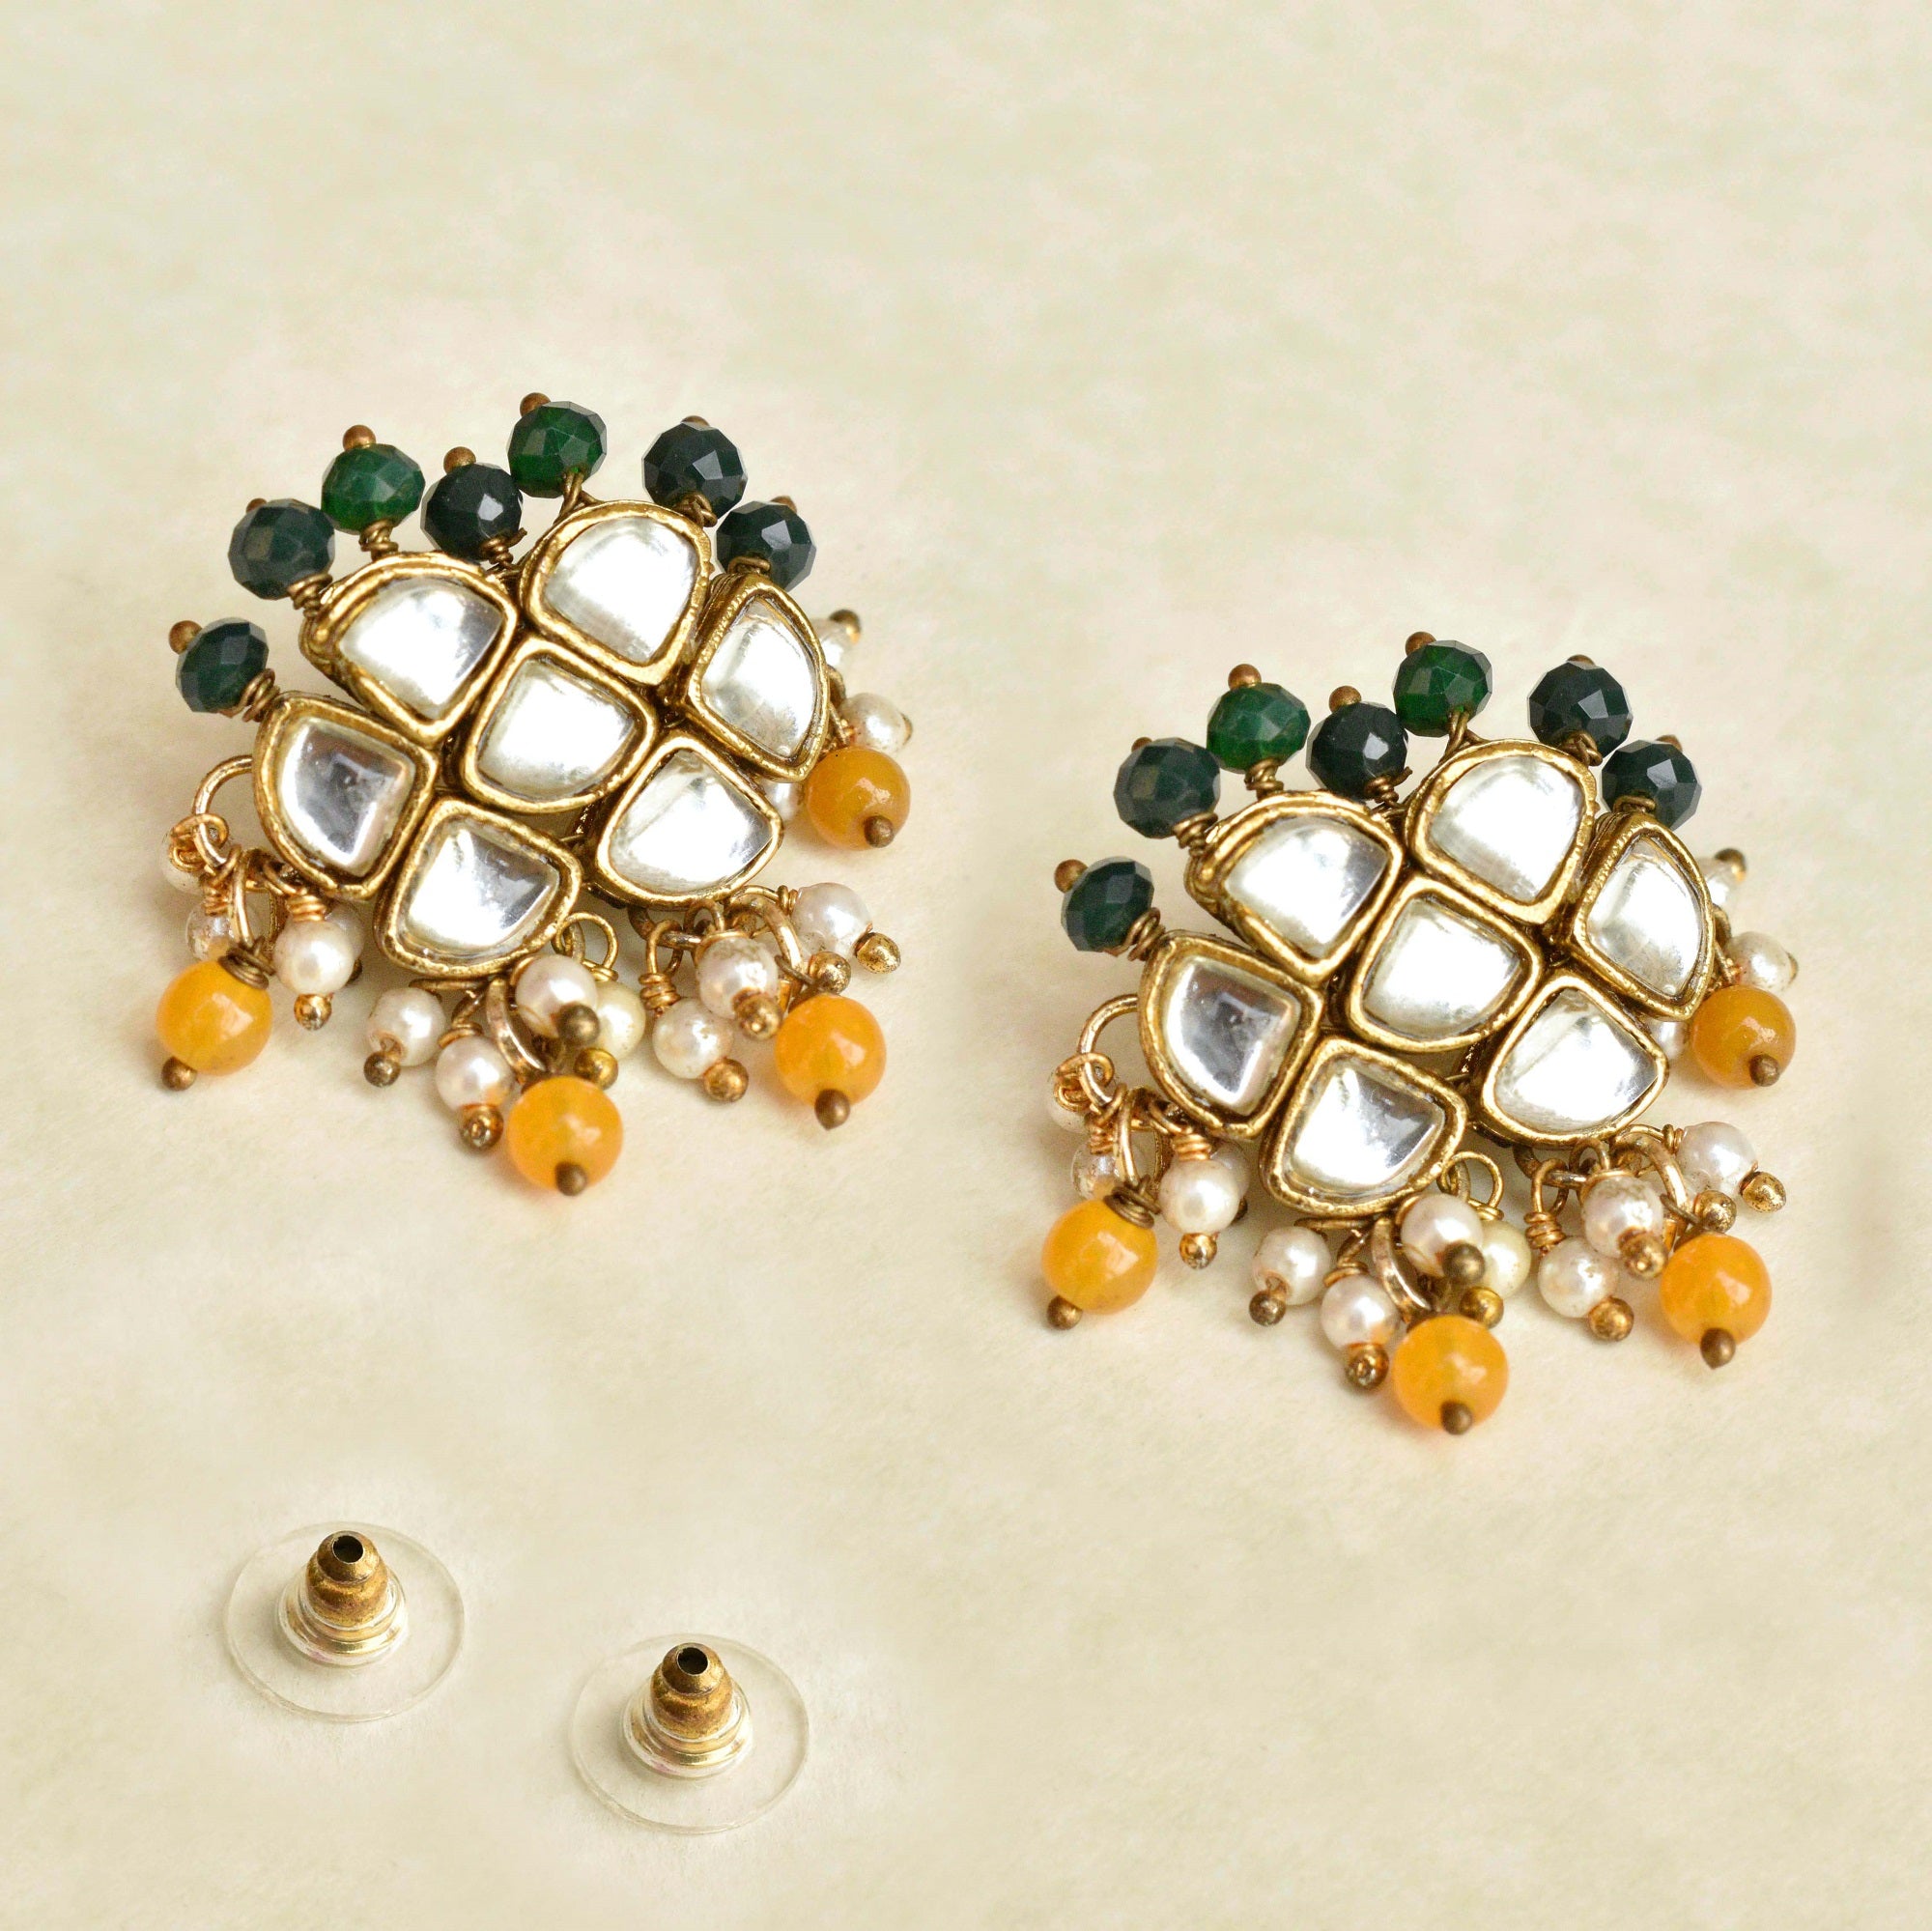 Beabhika Handmade Artificial Jewelry Green Color Kundan Studs Orange Color Kundan Small Earrings Daily Wear Unique Style Jewelry Traditional Heeramandi Style Jewelry Available On COD In India Handmade Honeycomb Style Kundan Earrings 